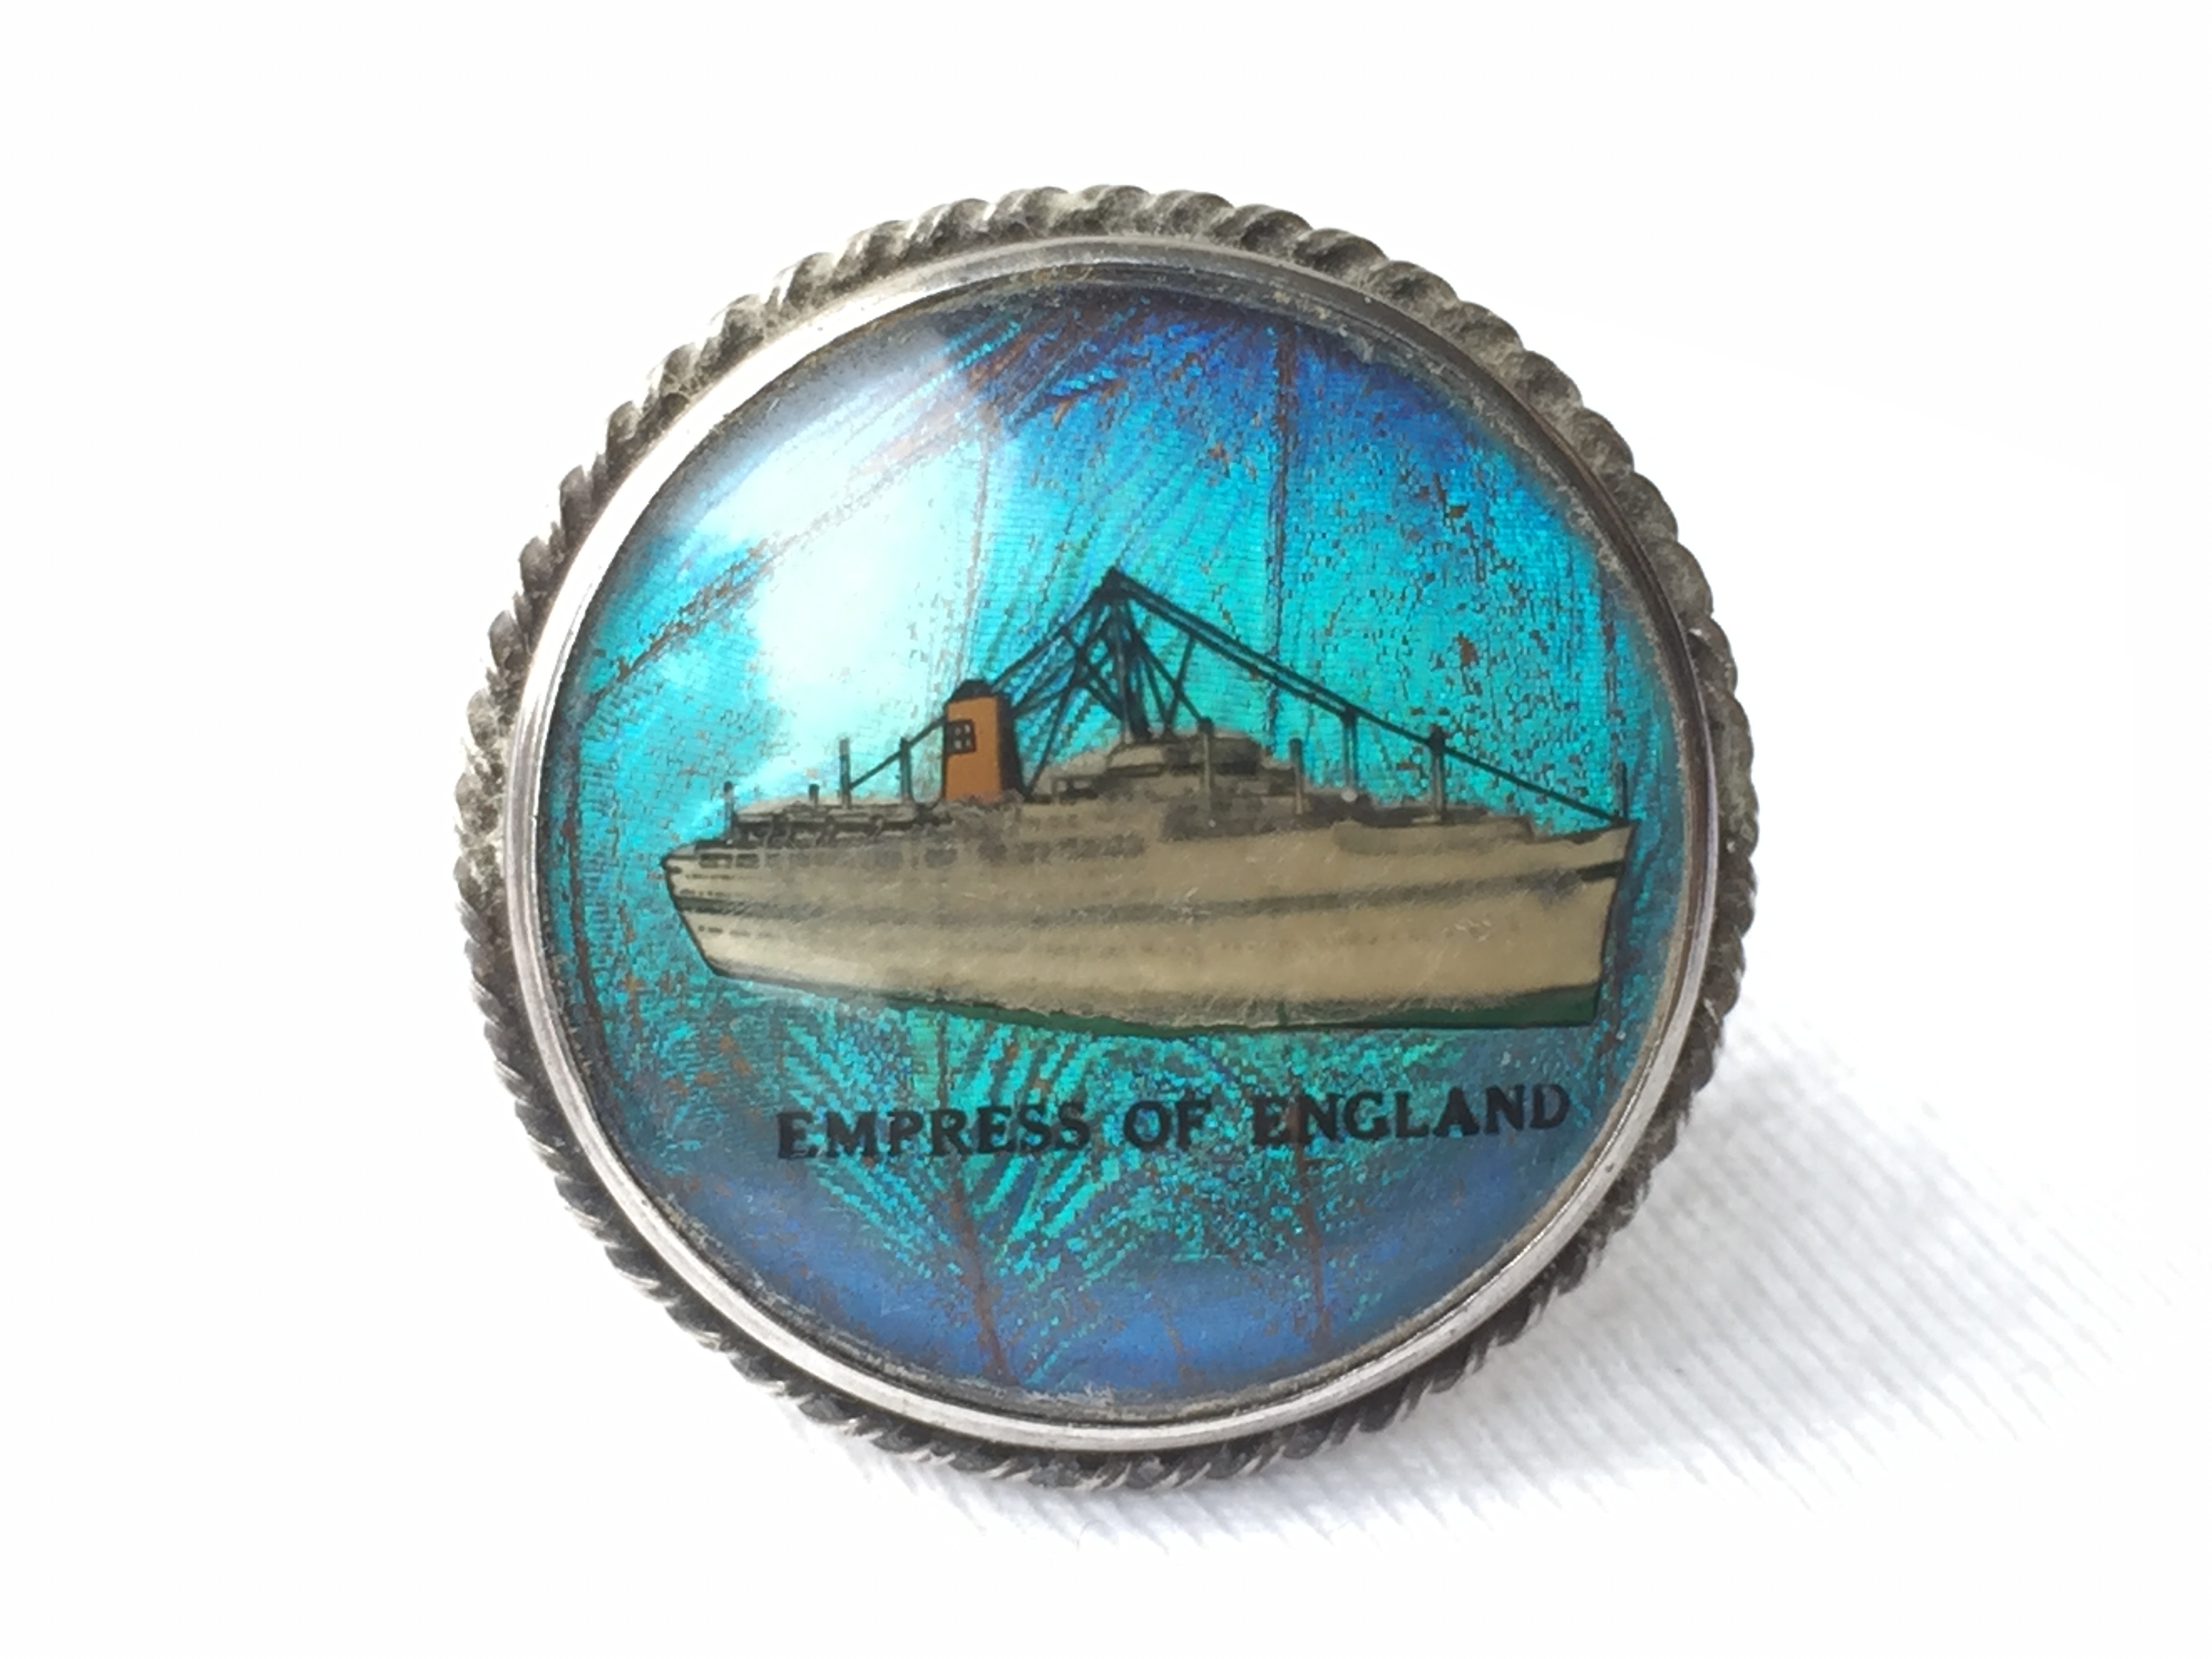 LAPEL PIN BADGE FROM THE CANADIAN PACIFIC LINE VESSEL THE EMPRESS OF ENGLAND 1956-1970